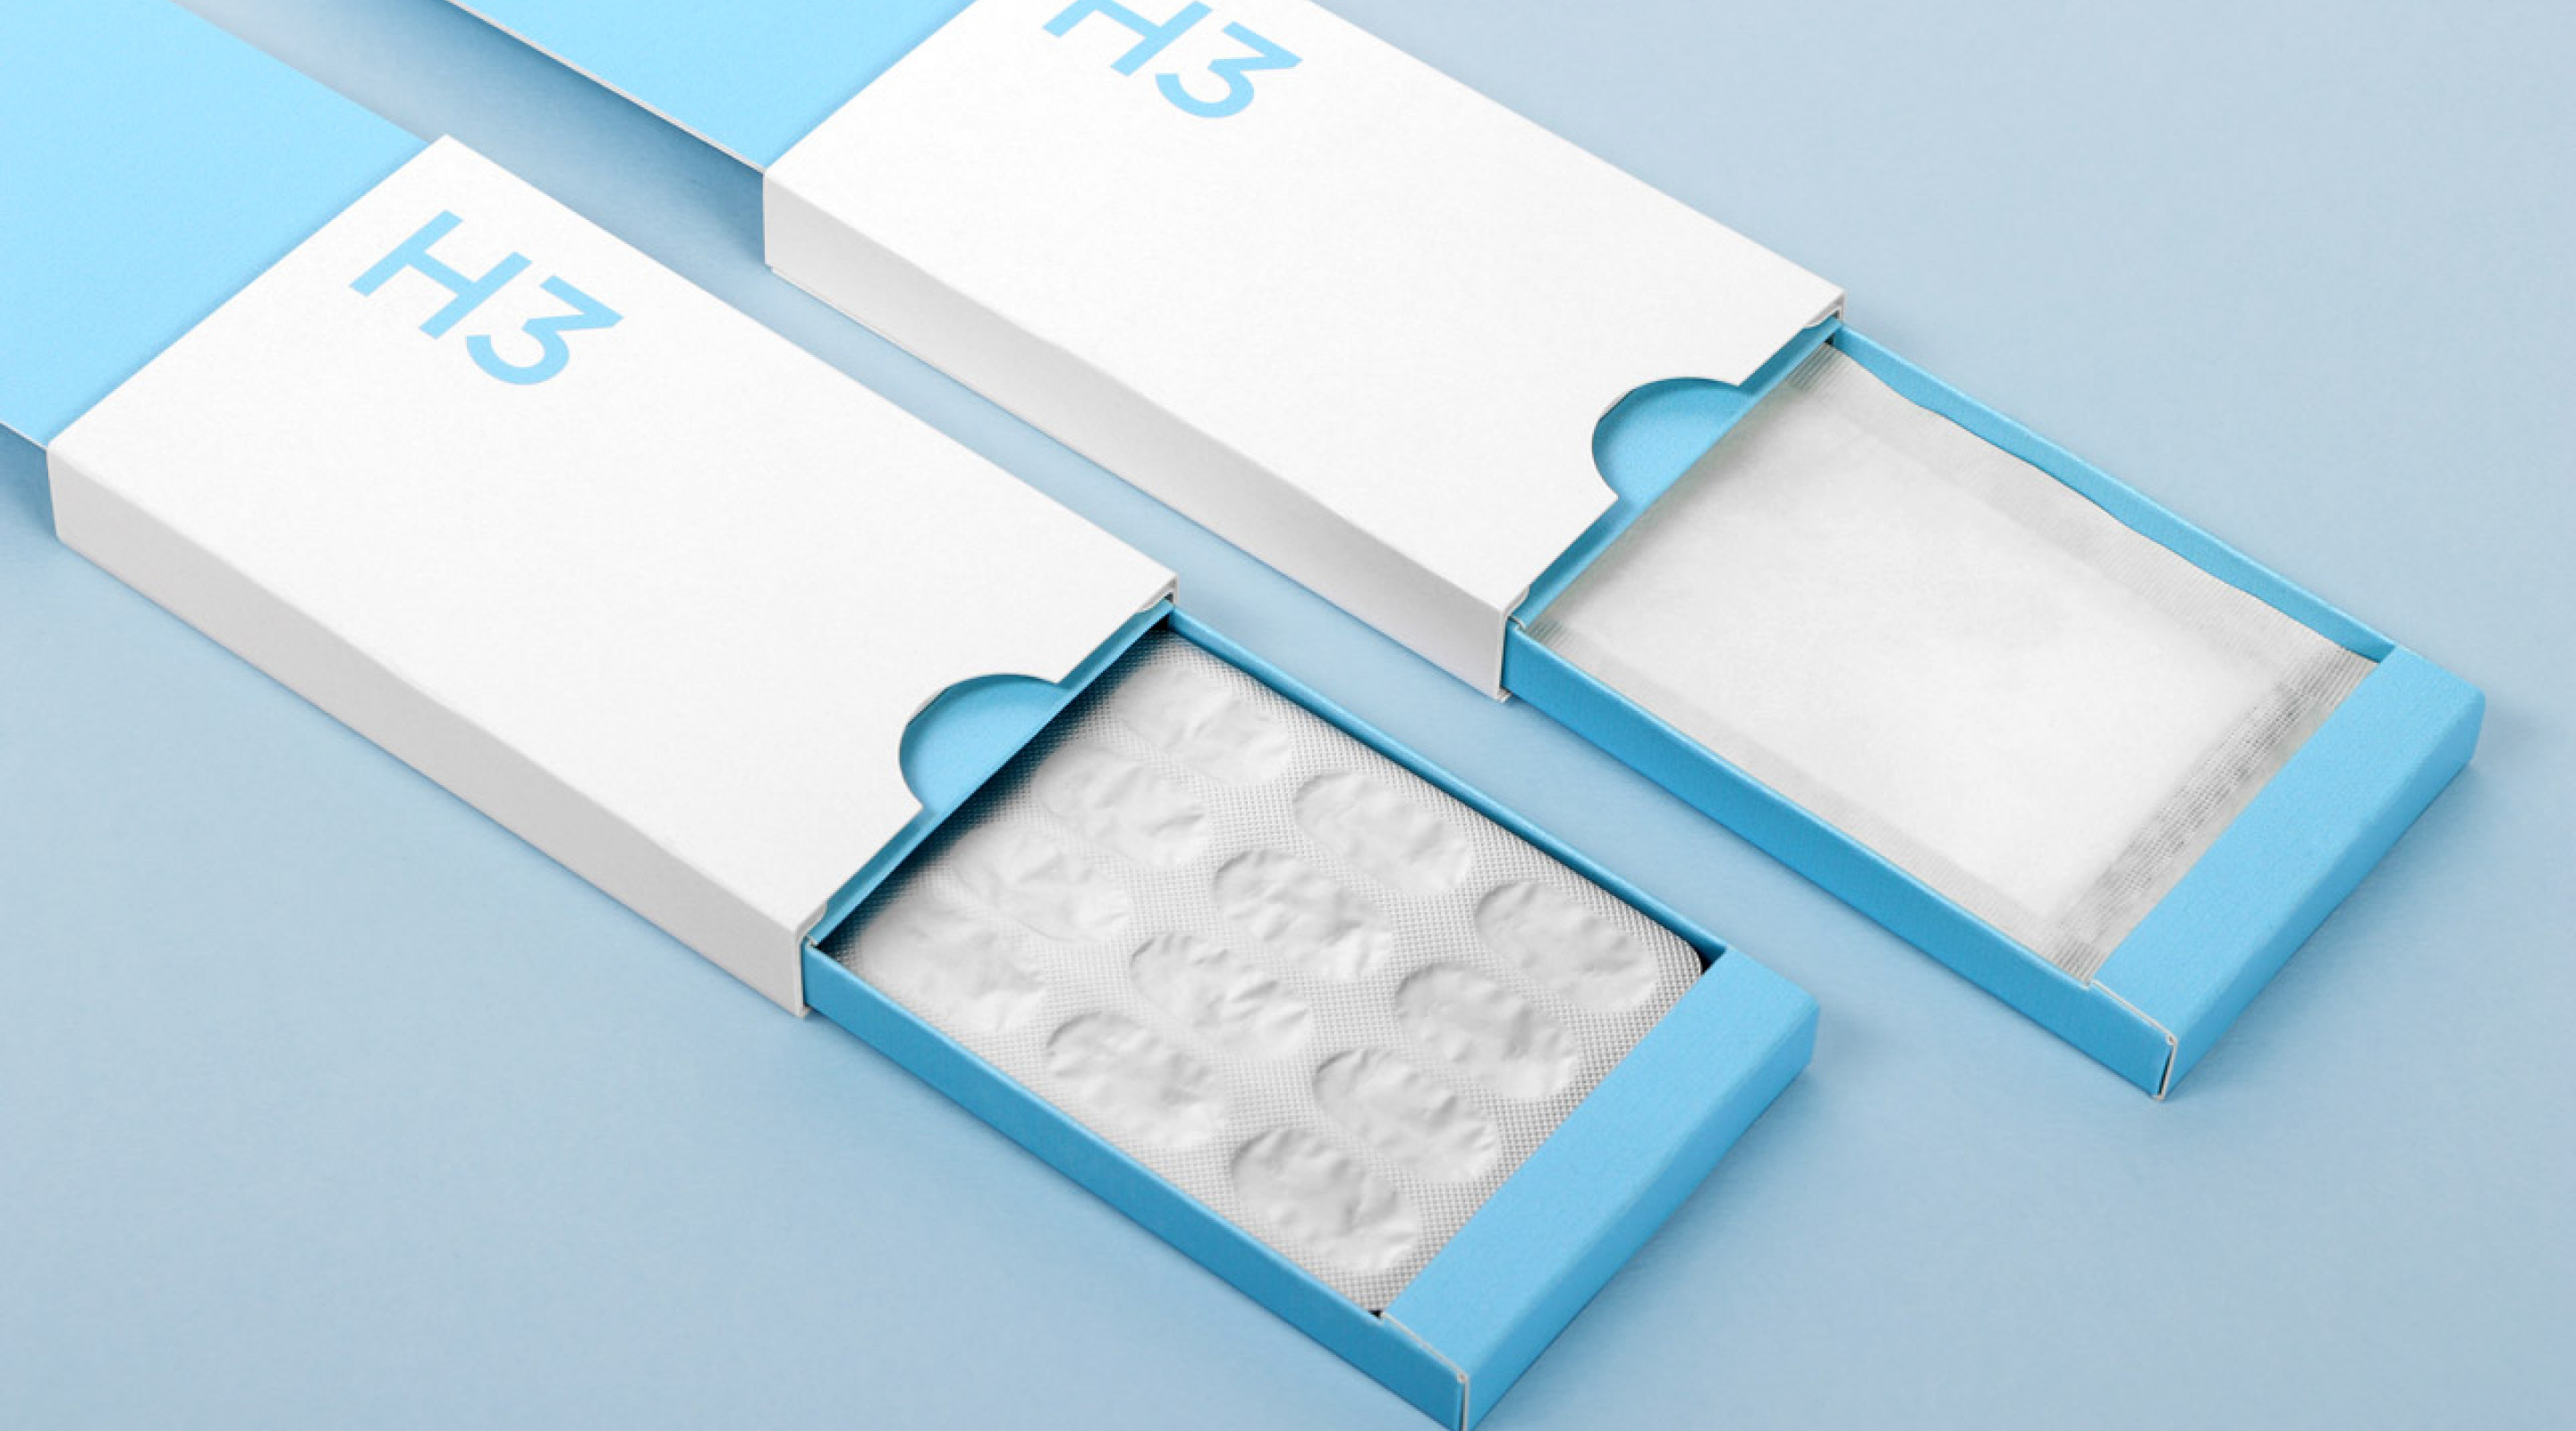 H3 Promotional Pack - Blisters or Sachets + Booklet